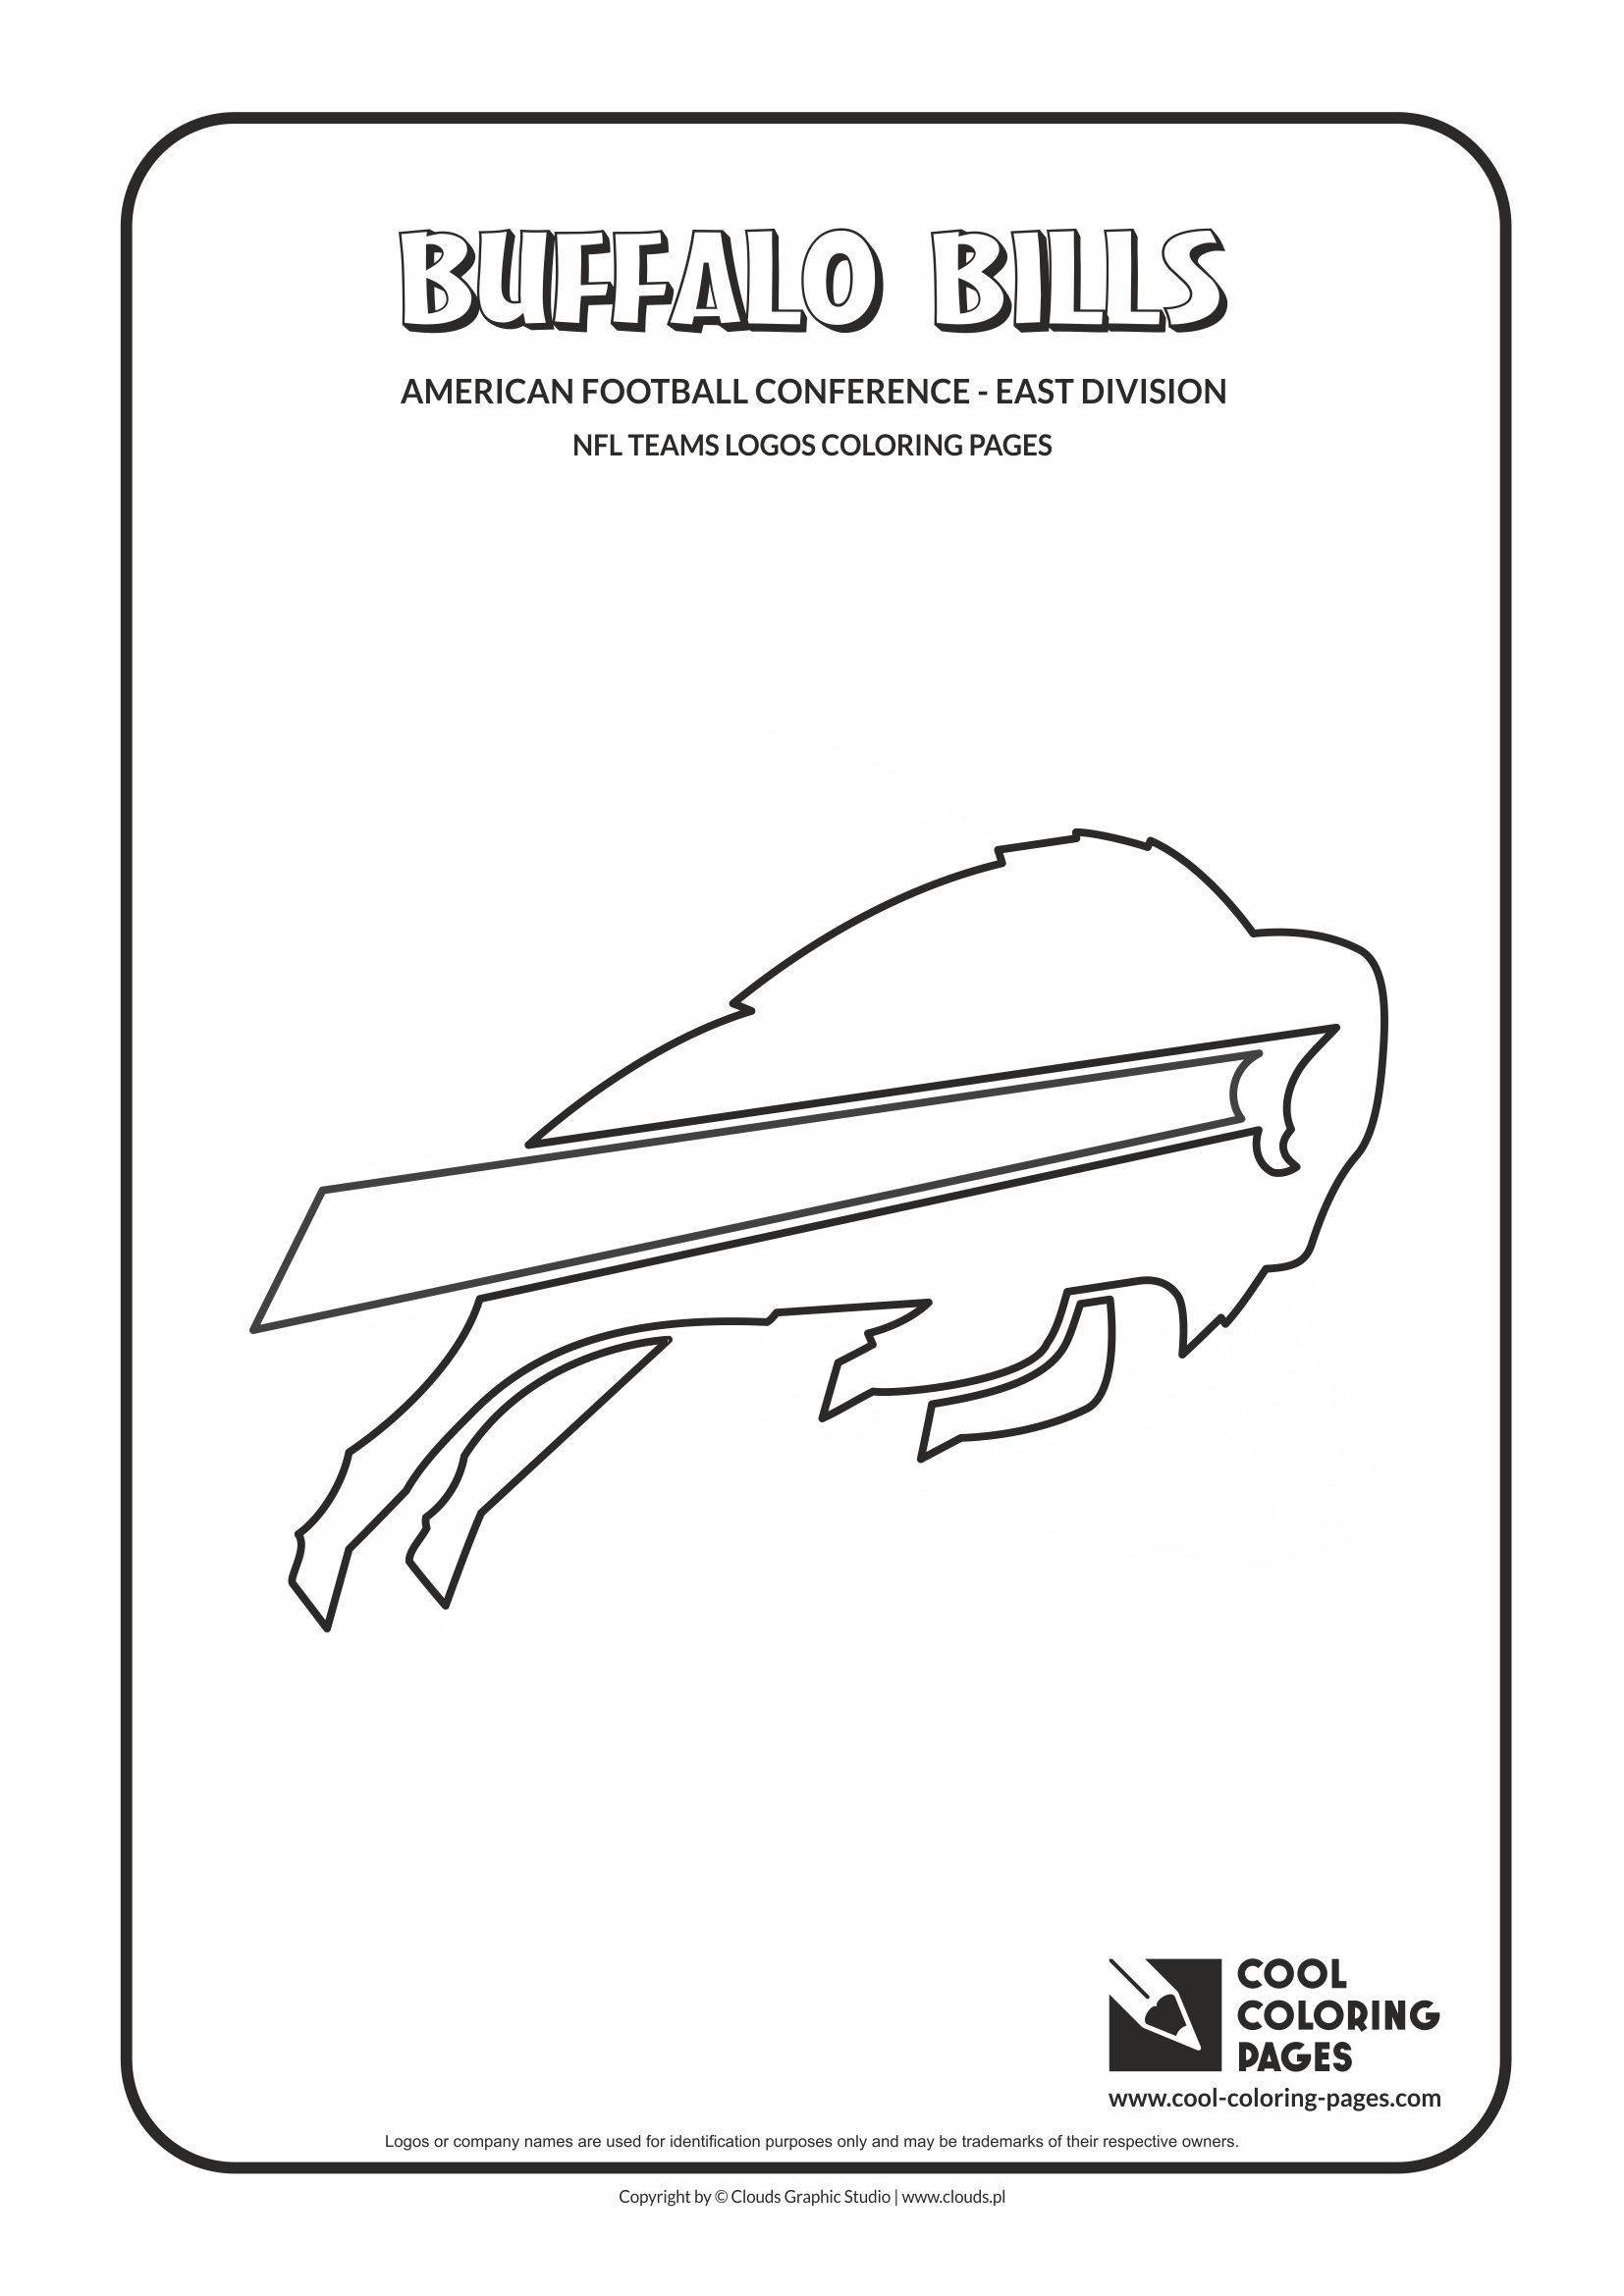 Cool Coloring Pages - NFL American Football Clubs Logos - American Football Conference - East Division / Buffalo Bills logo / Coloring page with Buffalo Bills logo